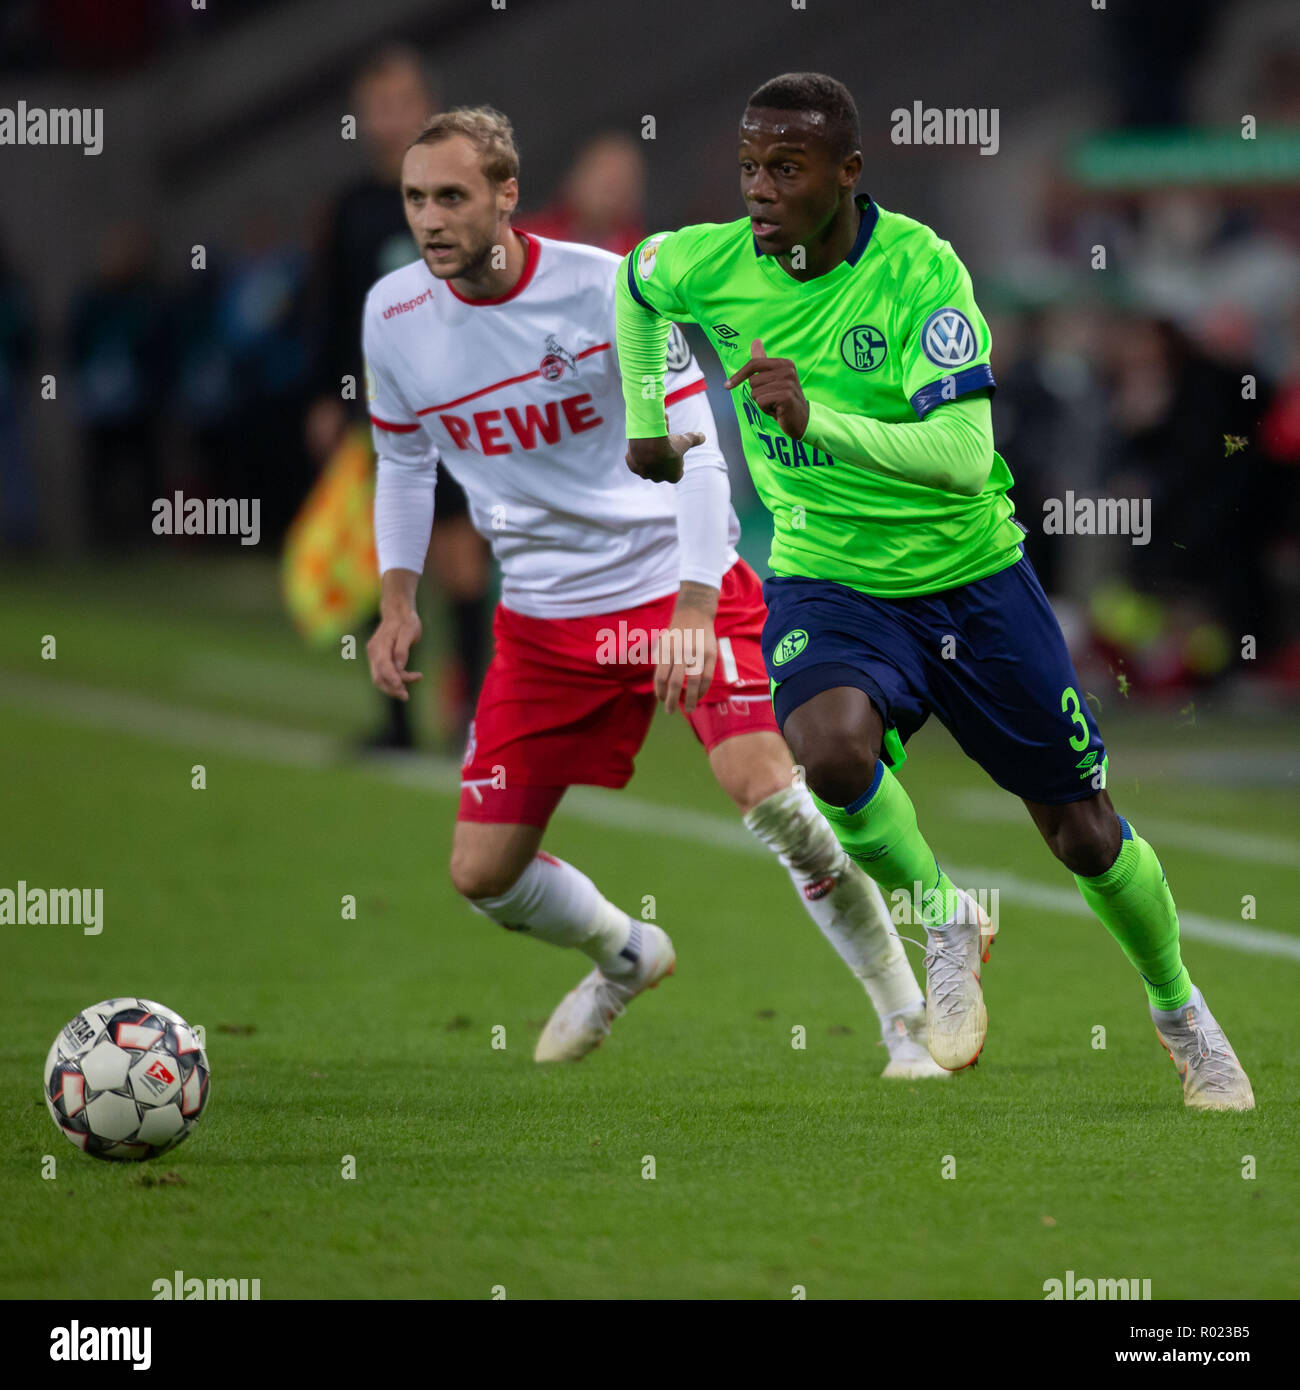 Cologne, Germany October 31 2018, DFB Pokal, FC Koeln - FC Schalke 04: Marcel Risse (Koeln), Hamza Mendyl (S04) in competition.                  Credit: Juergen Schwarz/Alamy Live News    DFB REGULATIONS PROHIBIT ANY USE OF PHOTOGRAPHS AS IMAGE SEQUENCES AND/OR QUASI-VIDEO Credit: Juergen Schwarz/Alamy Live News Stock Photo